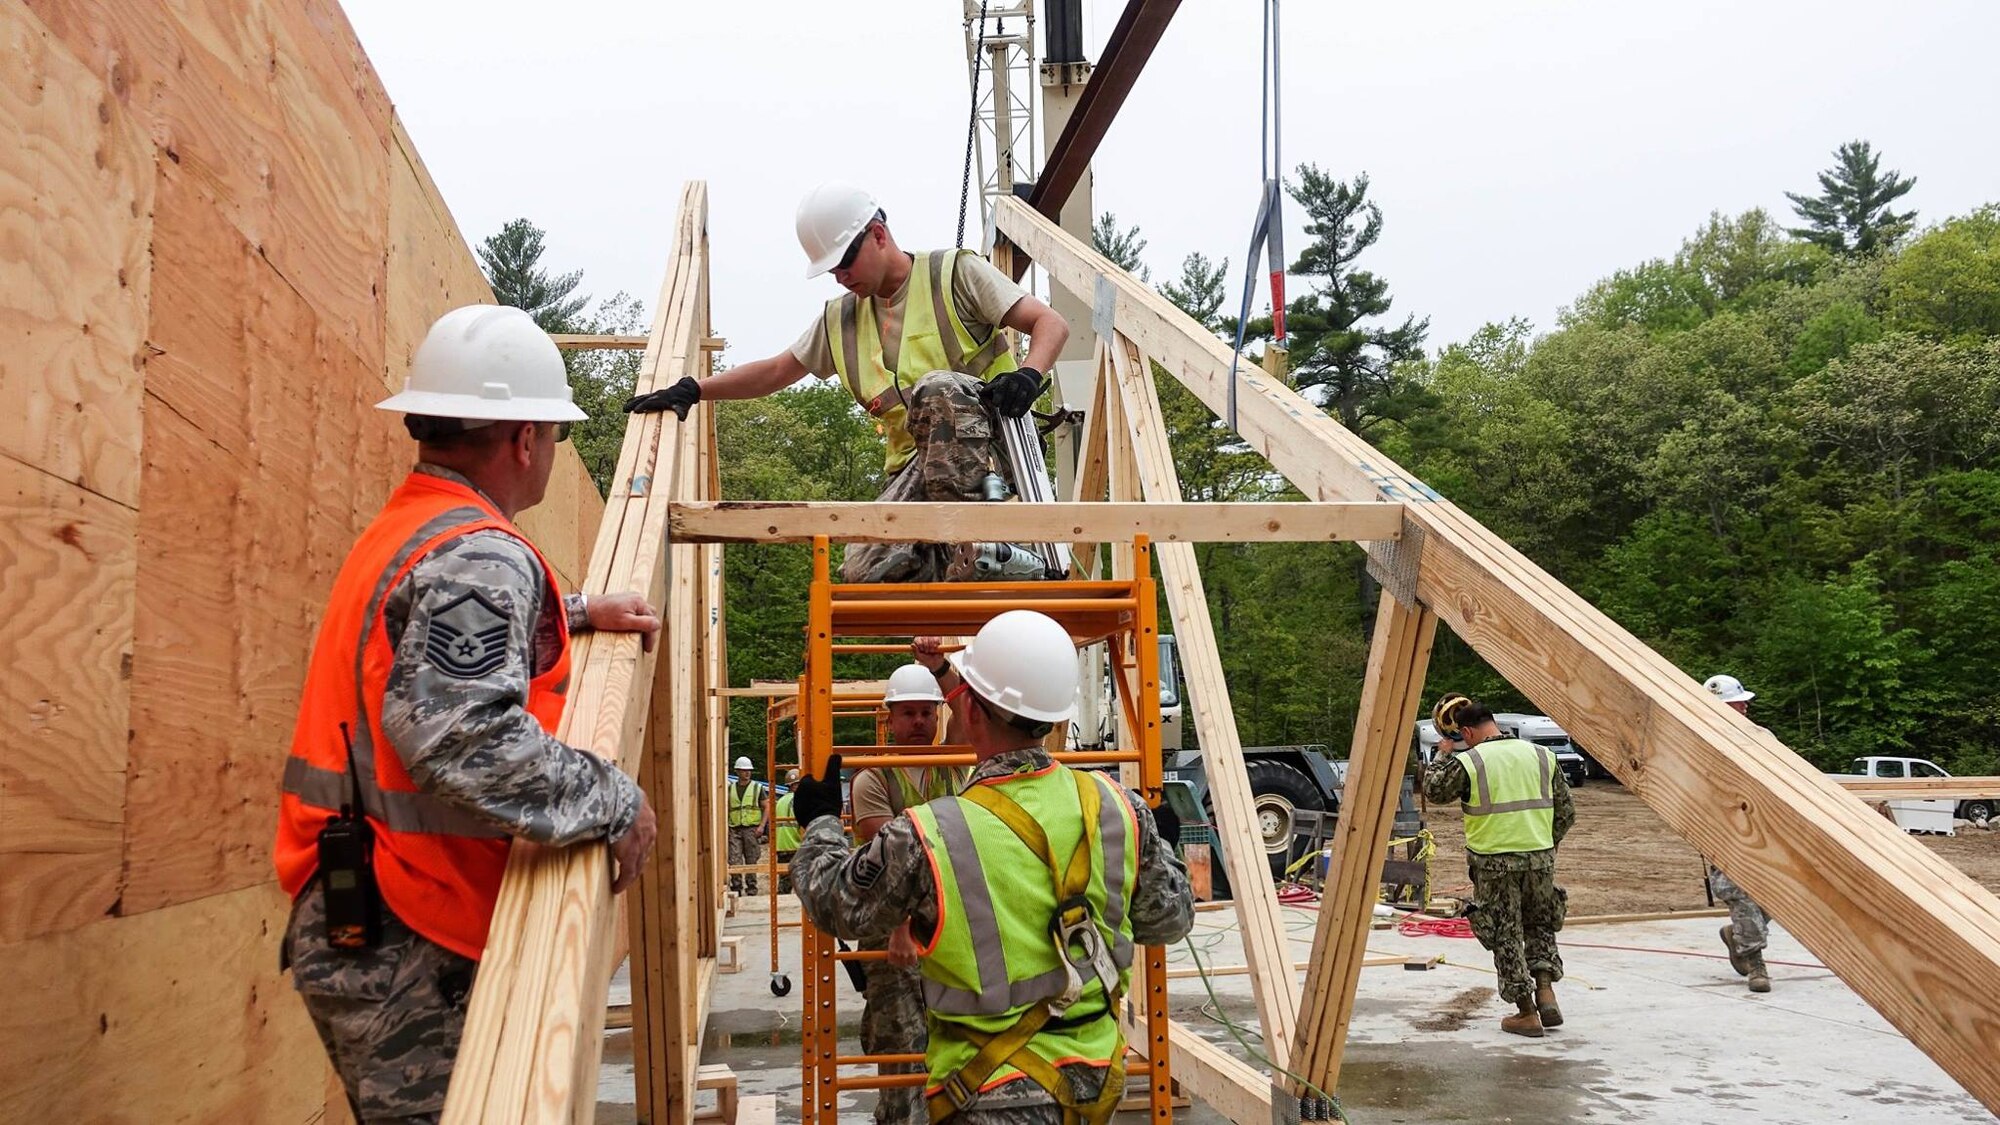 U.S. Airmen with the 139th Civil Engineer Squadron, Missouri Air National Guard, participate in Innovative Readiness Training (IRT), at William Hinds Boy Scout Camp in Raymond, Maine, on May 24, 2016. The IRT is part of a joint exercise with the U.S. Marines, Navy, Air National Guard, and Air Force Reserve to help rebuild parts of the camp. (U.S. Air National Guard photo by Senior Airman Sheldon Thompson/released)